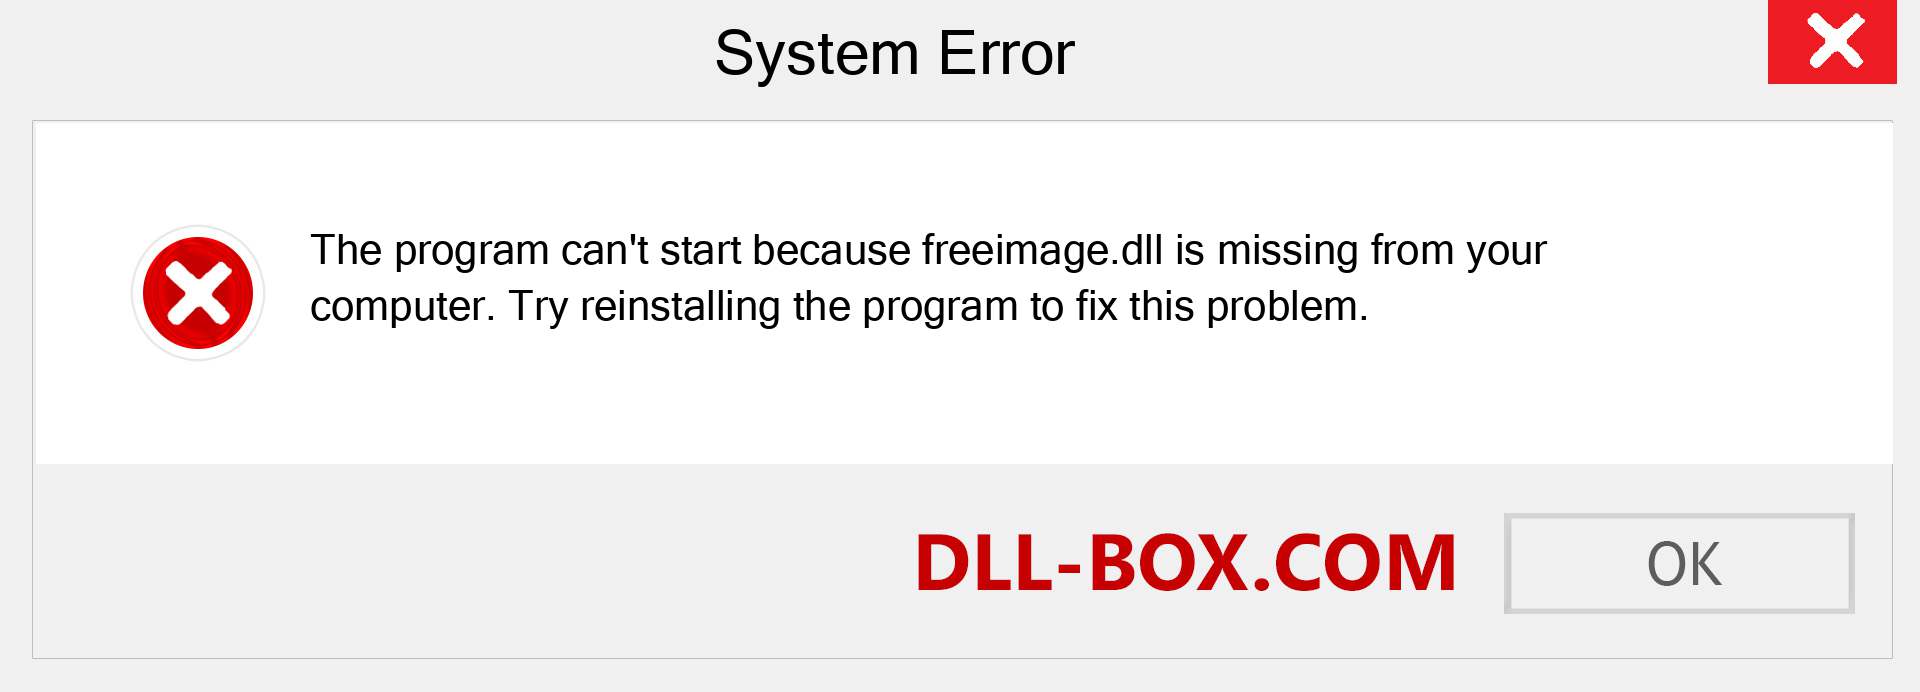  freeimage.dll file is missing?. Download for Windows 7, 8, 10 - Fix  freeimage dll Missing Error on Windows, photos, images